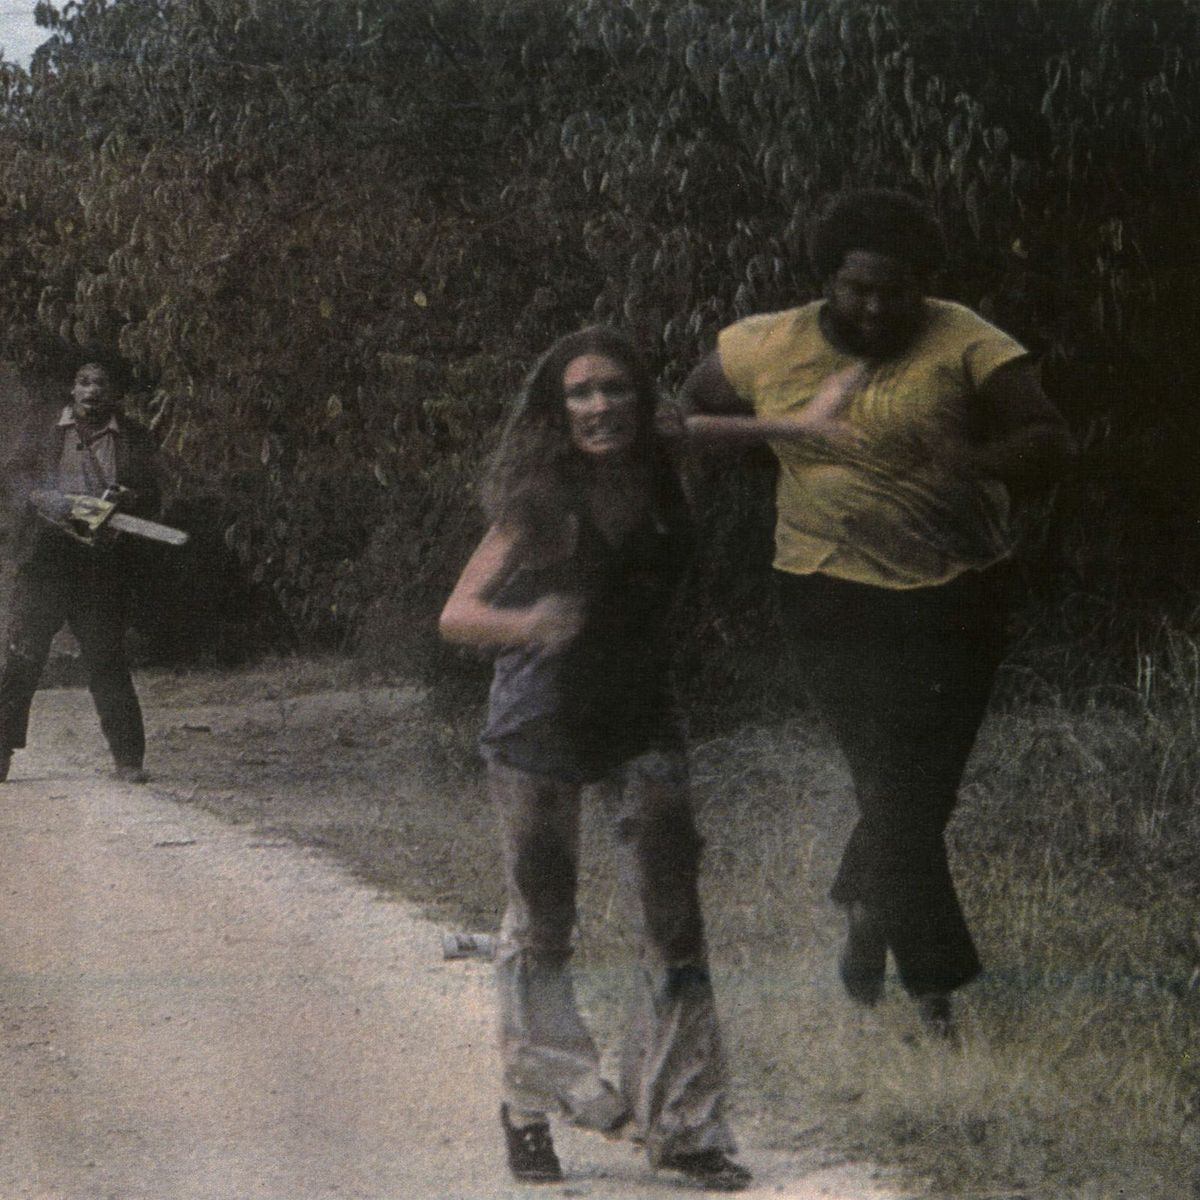 The Real Life Injuries in 'The Texas Chainsaw Massacre' - Longreads